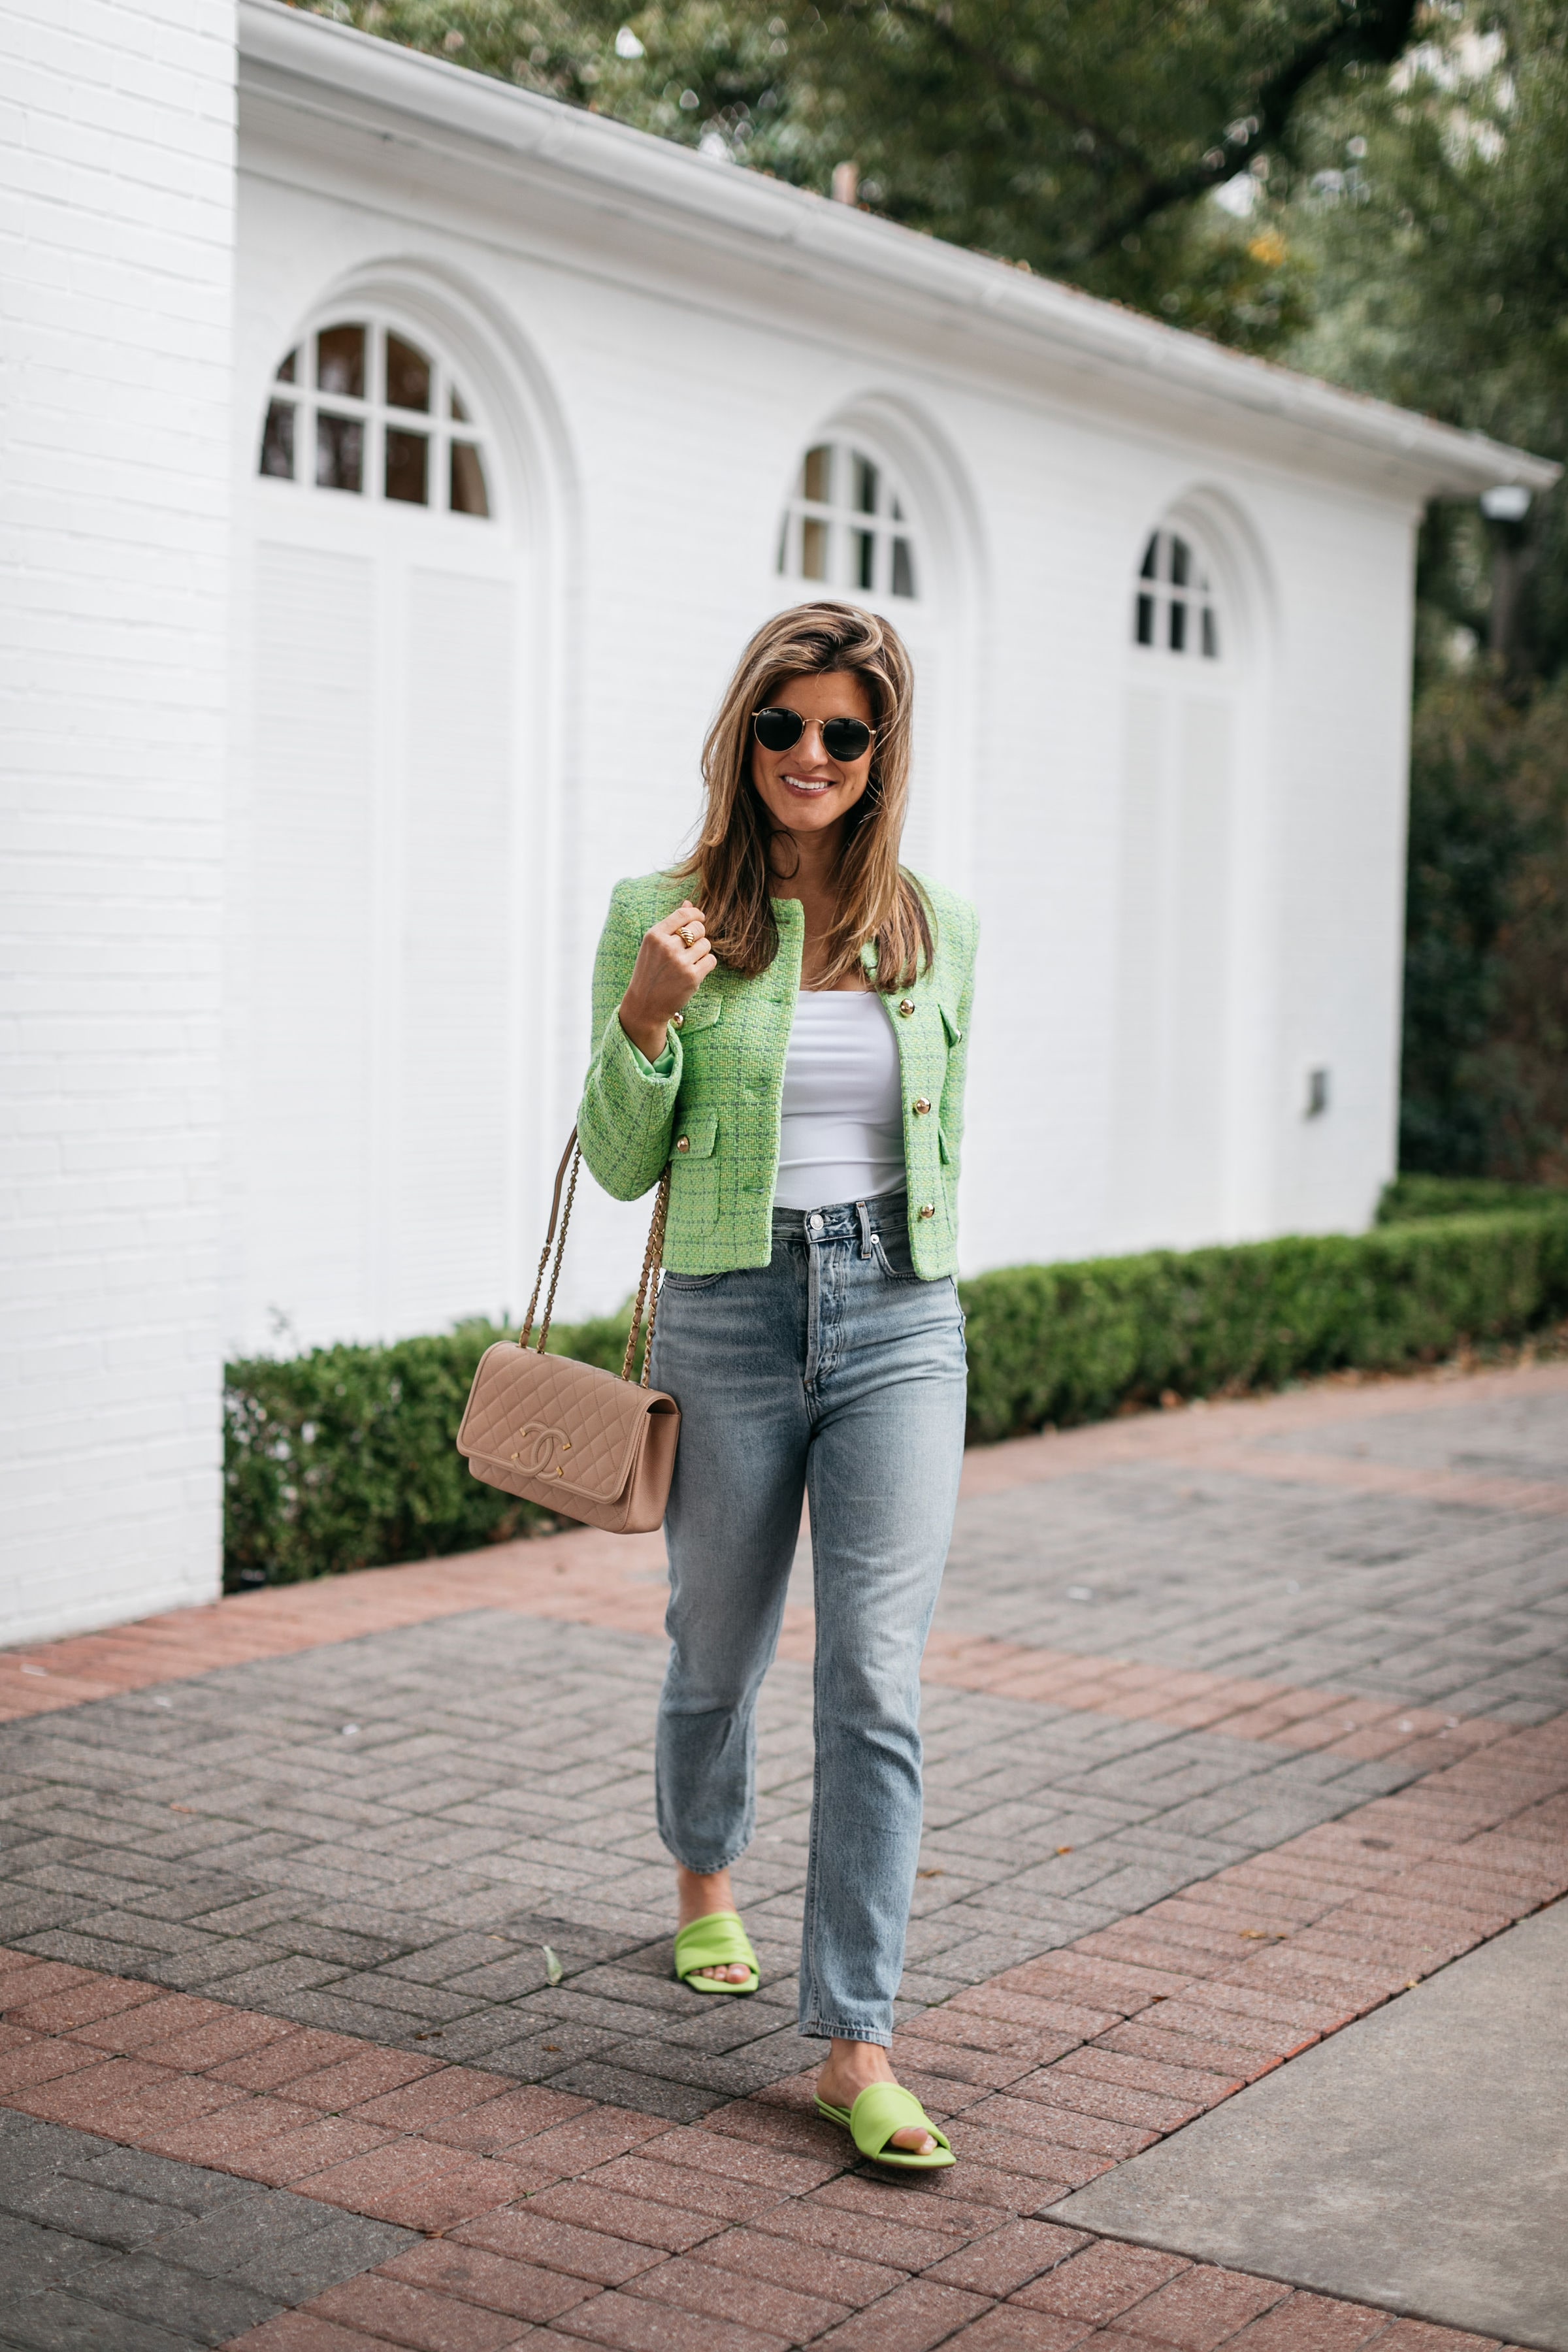 Brighton Butler wearing green spring jacket with lime green sandals